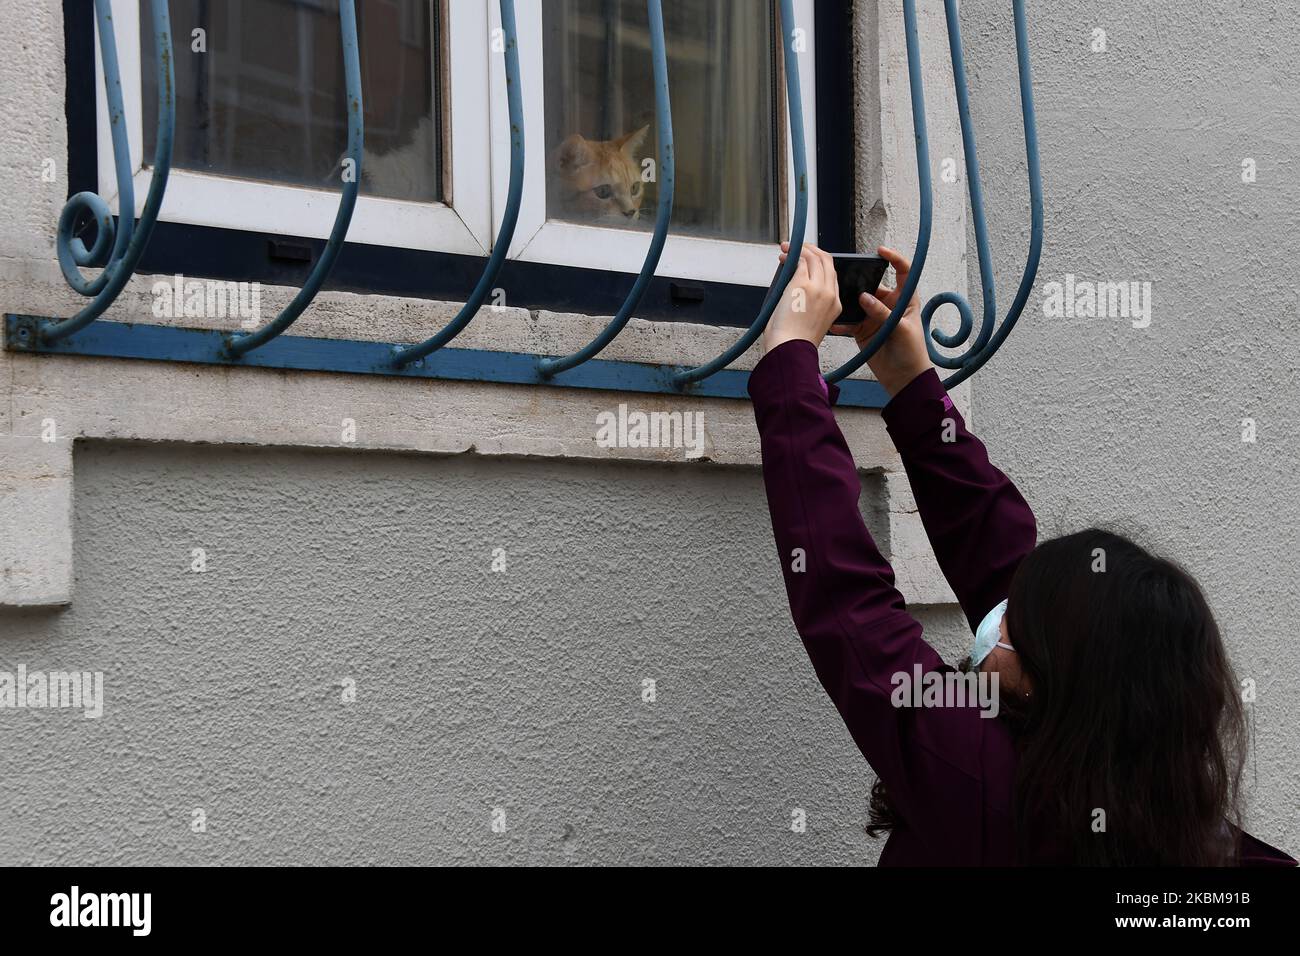 A woman photographs a cat in the window of a building during quarantine days, in Lisbon, 10 April 2020. The Portuguese Republican National Guard and animal protection groups have launched awareness campaigns to encourage people not to abandon their pets because of COVID-19, as a considerable number of animals have been left to their own fate due to fears that they could transmit the disease. However, new evidence indicates that cats may be infected with the new coronavirus. The information was provided by the Harbin Veterinary Research Institute, the leading animal research body in China. (Pho Stock Photo